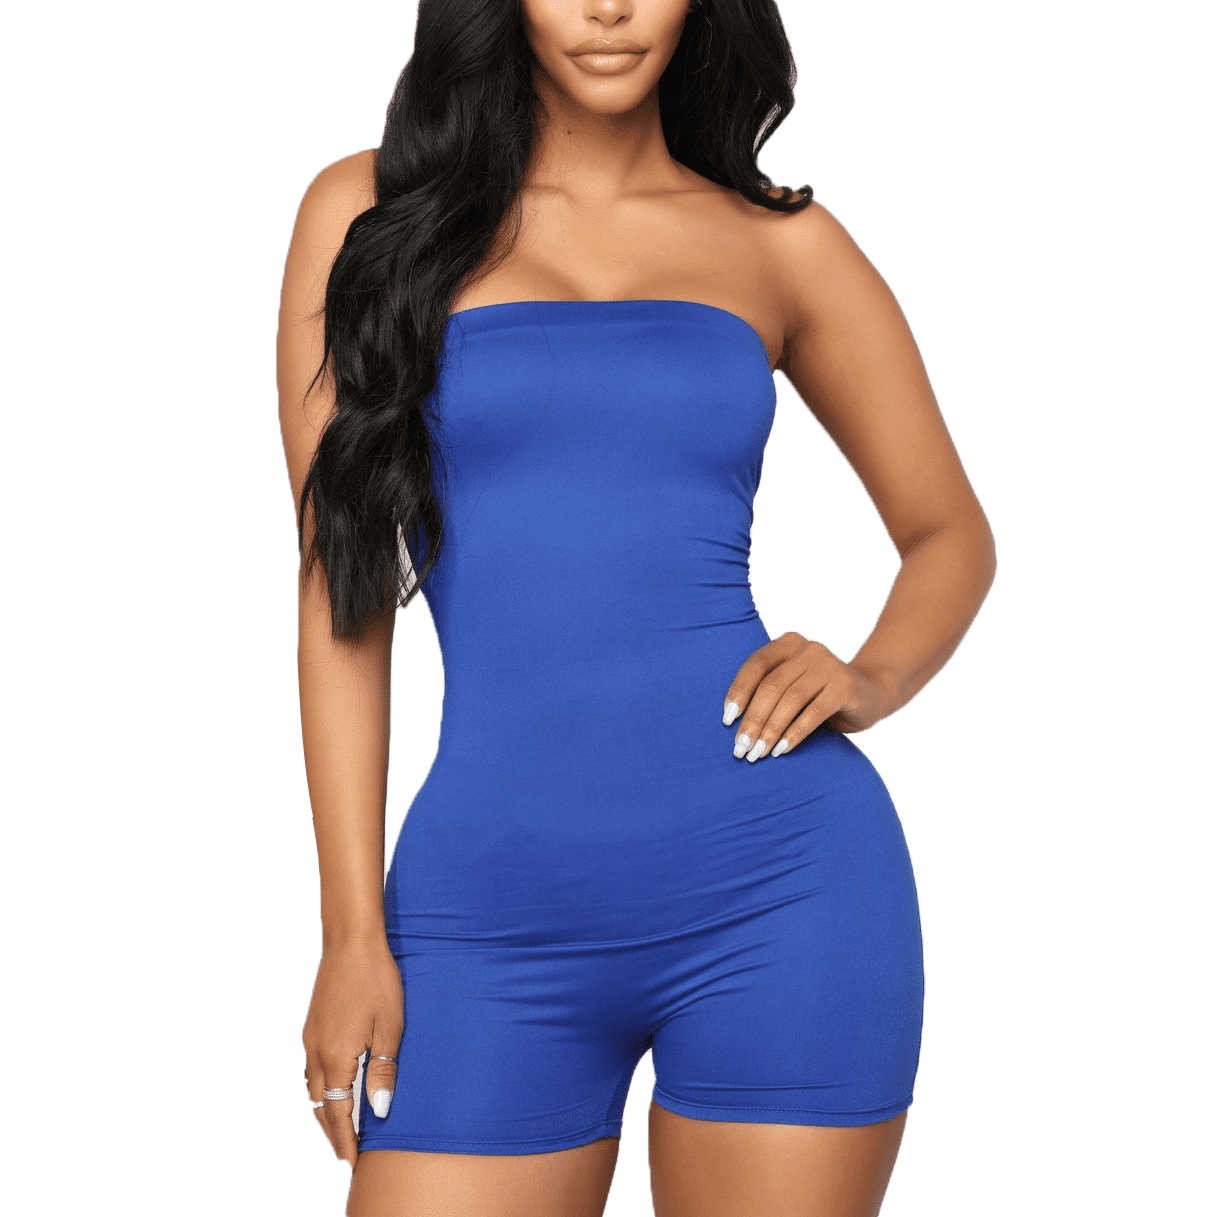 XBTCLXEBCO Women Strapless Tube Short Romper Jumpsuit Solid Color  Sleeveless Bodycon